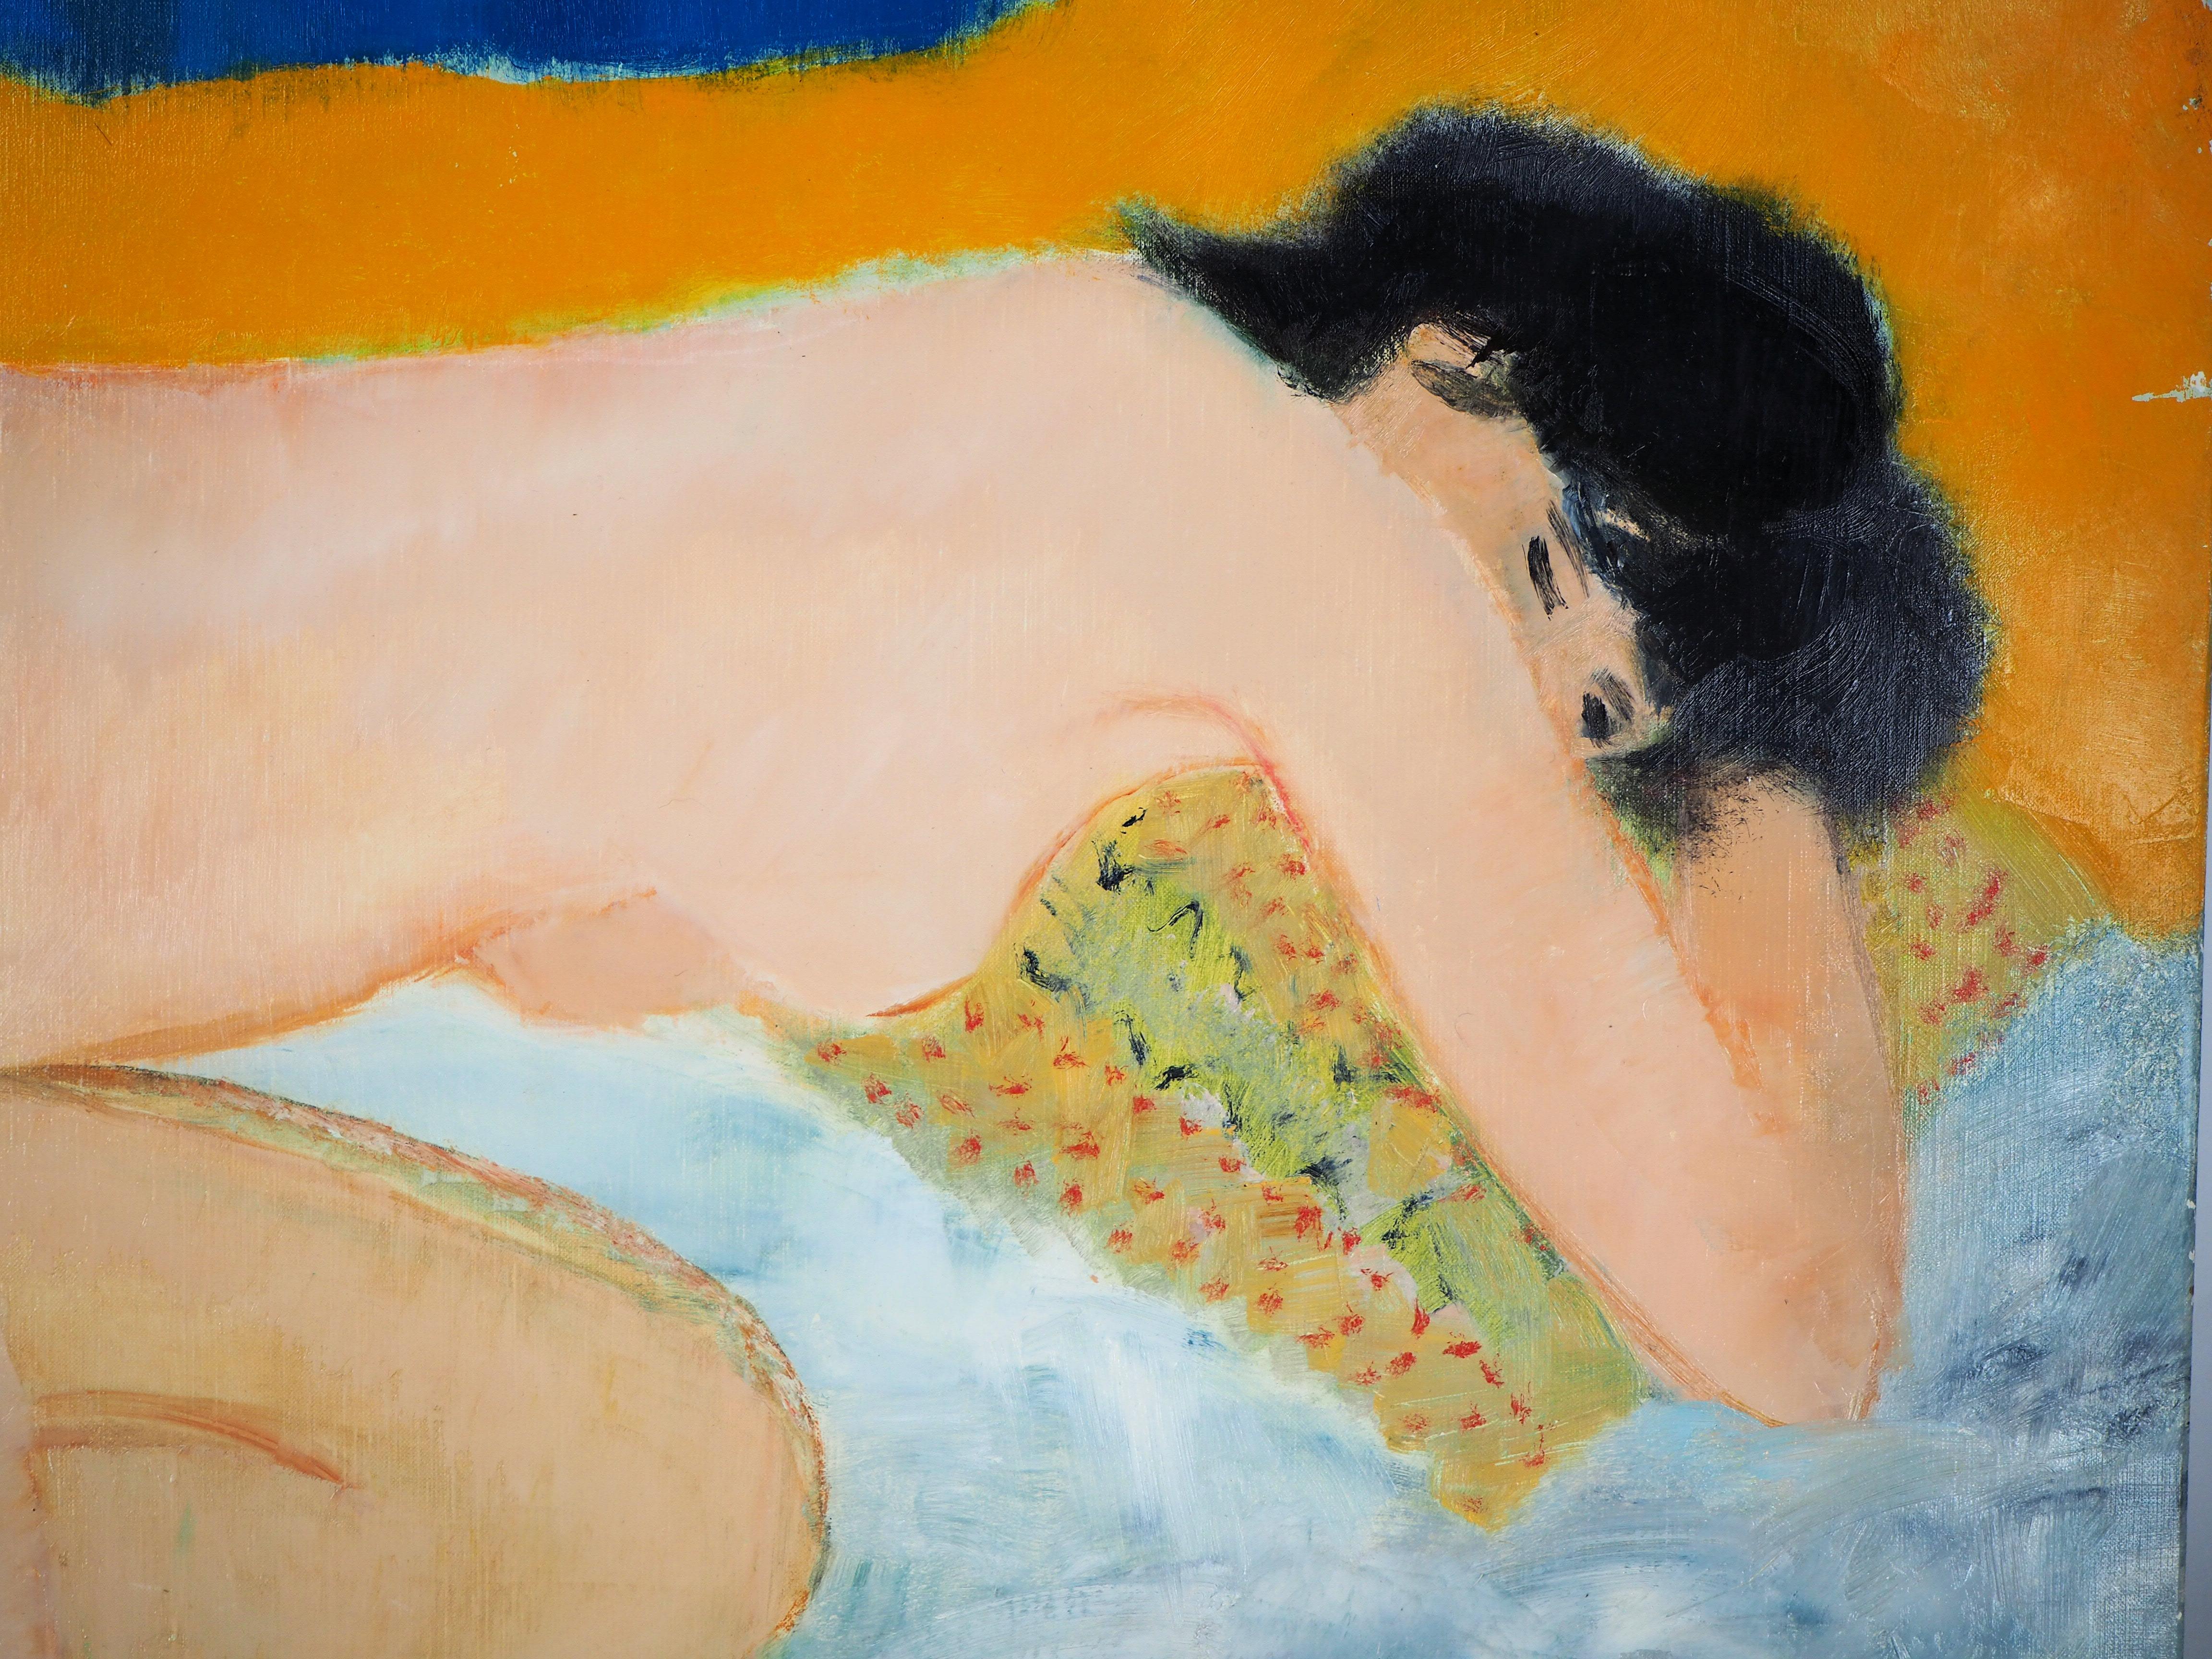 Interior : Nude Asleep on a Yellow Pillow - Original Oil on Canvas, Handsigned - Beige Nude Painting by Guy Bardone